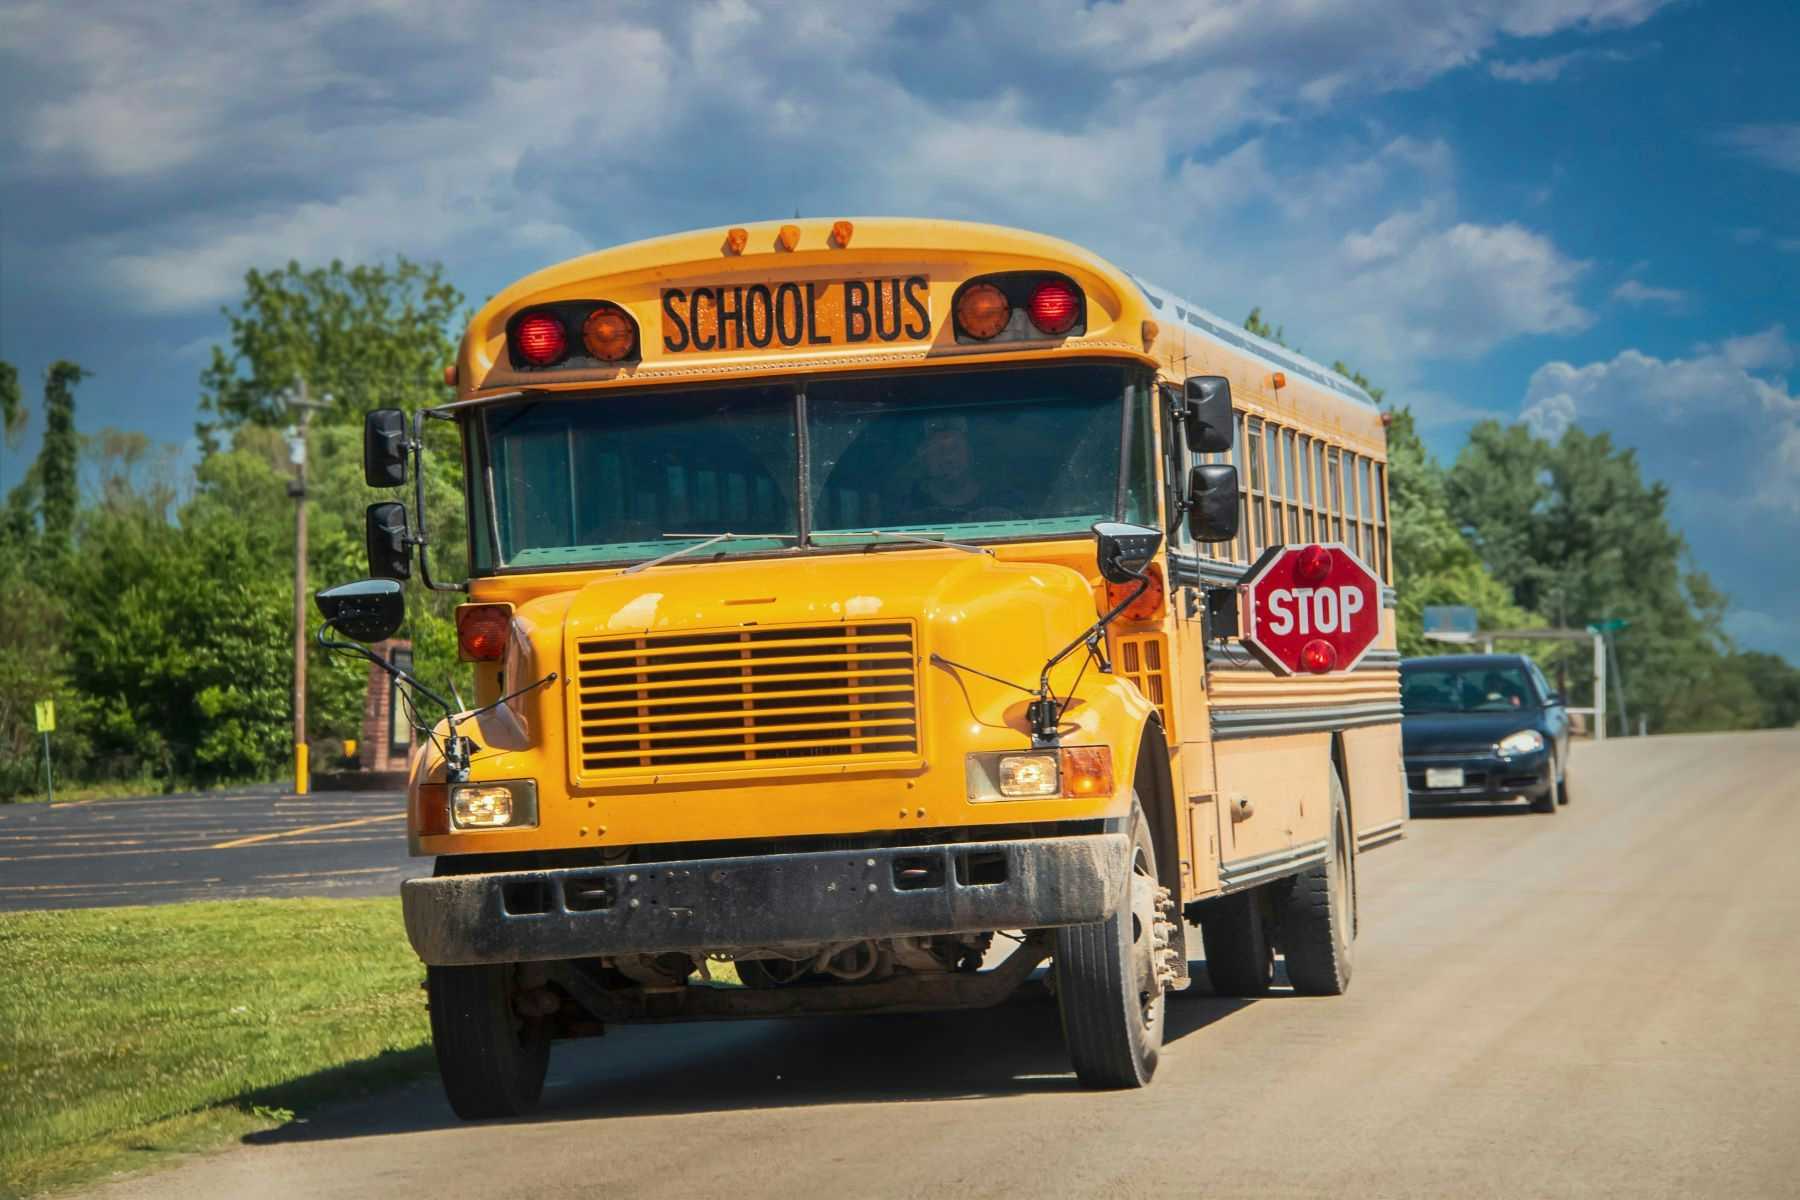 School bus stopped on road